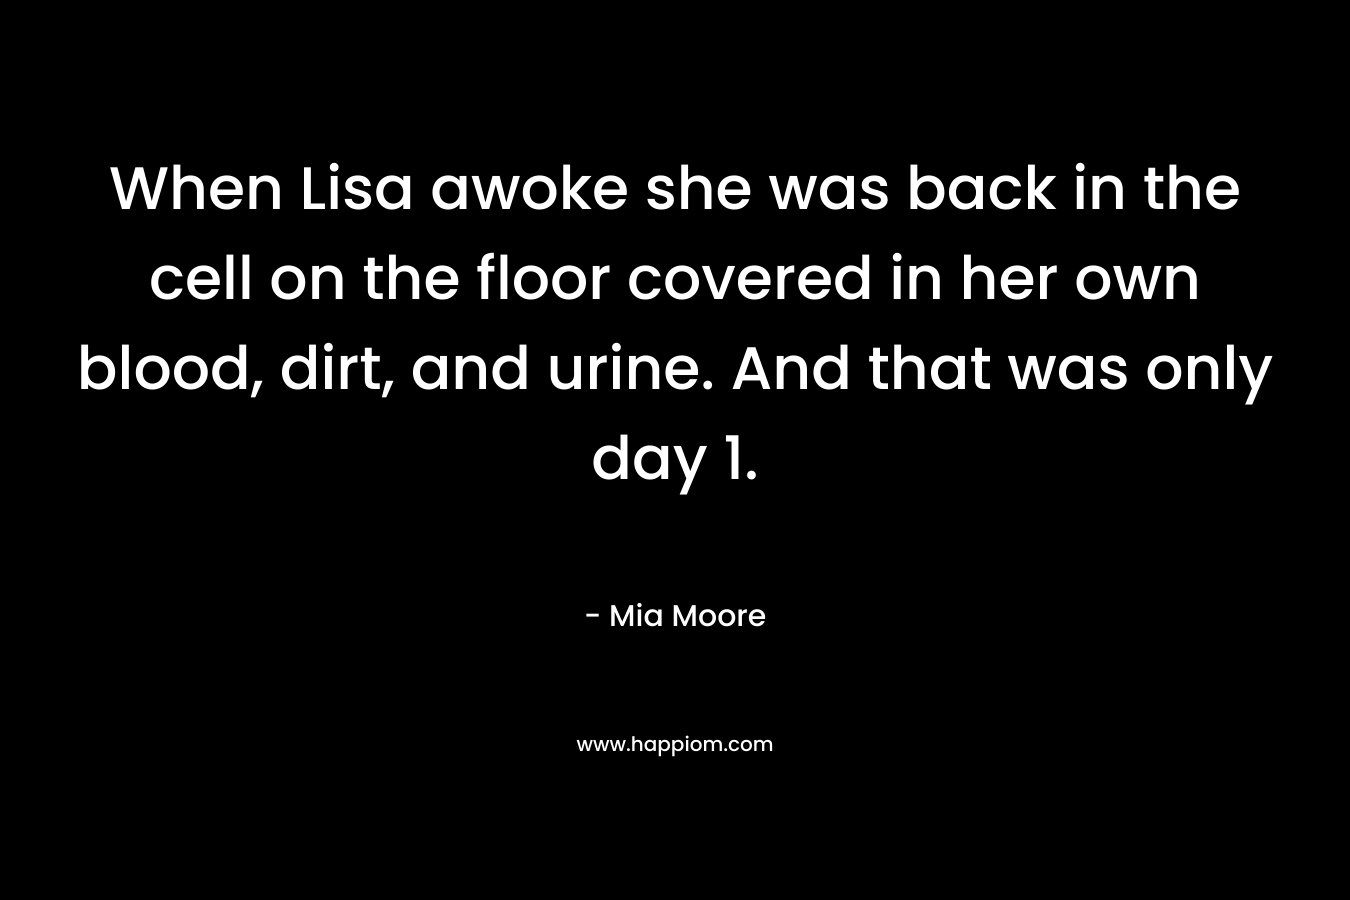 When Lisa awoke she was back in the cell on the floor covered in her own blood, dirt, and urine. And that was only day 1.